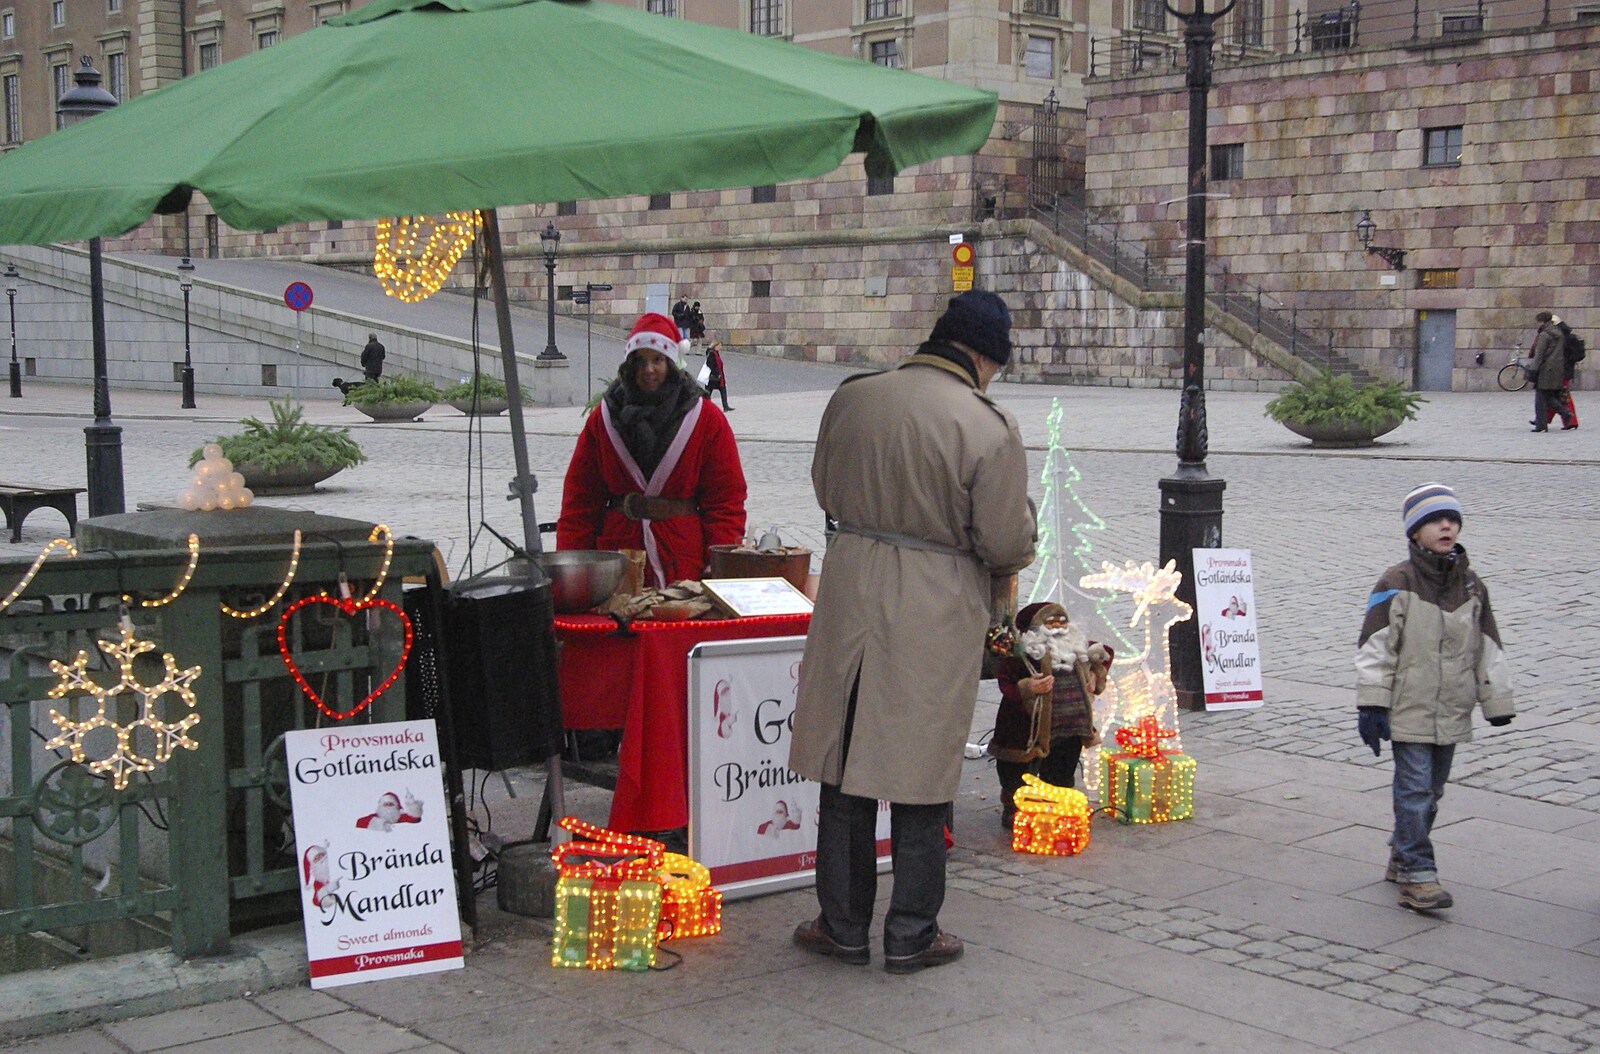 A Christmas stall from Gamla Stan, Stockholm, Sweden - 15th December 2007